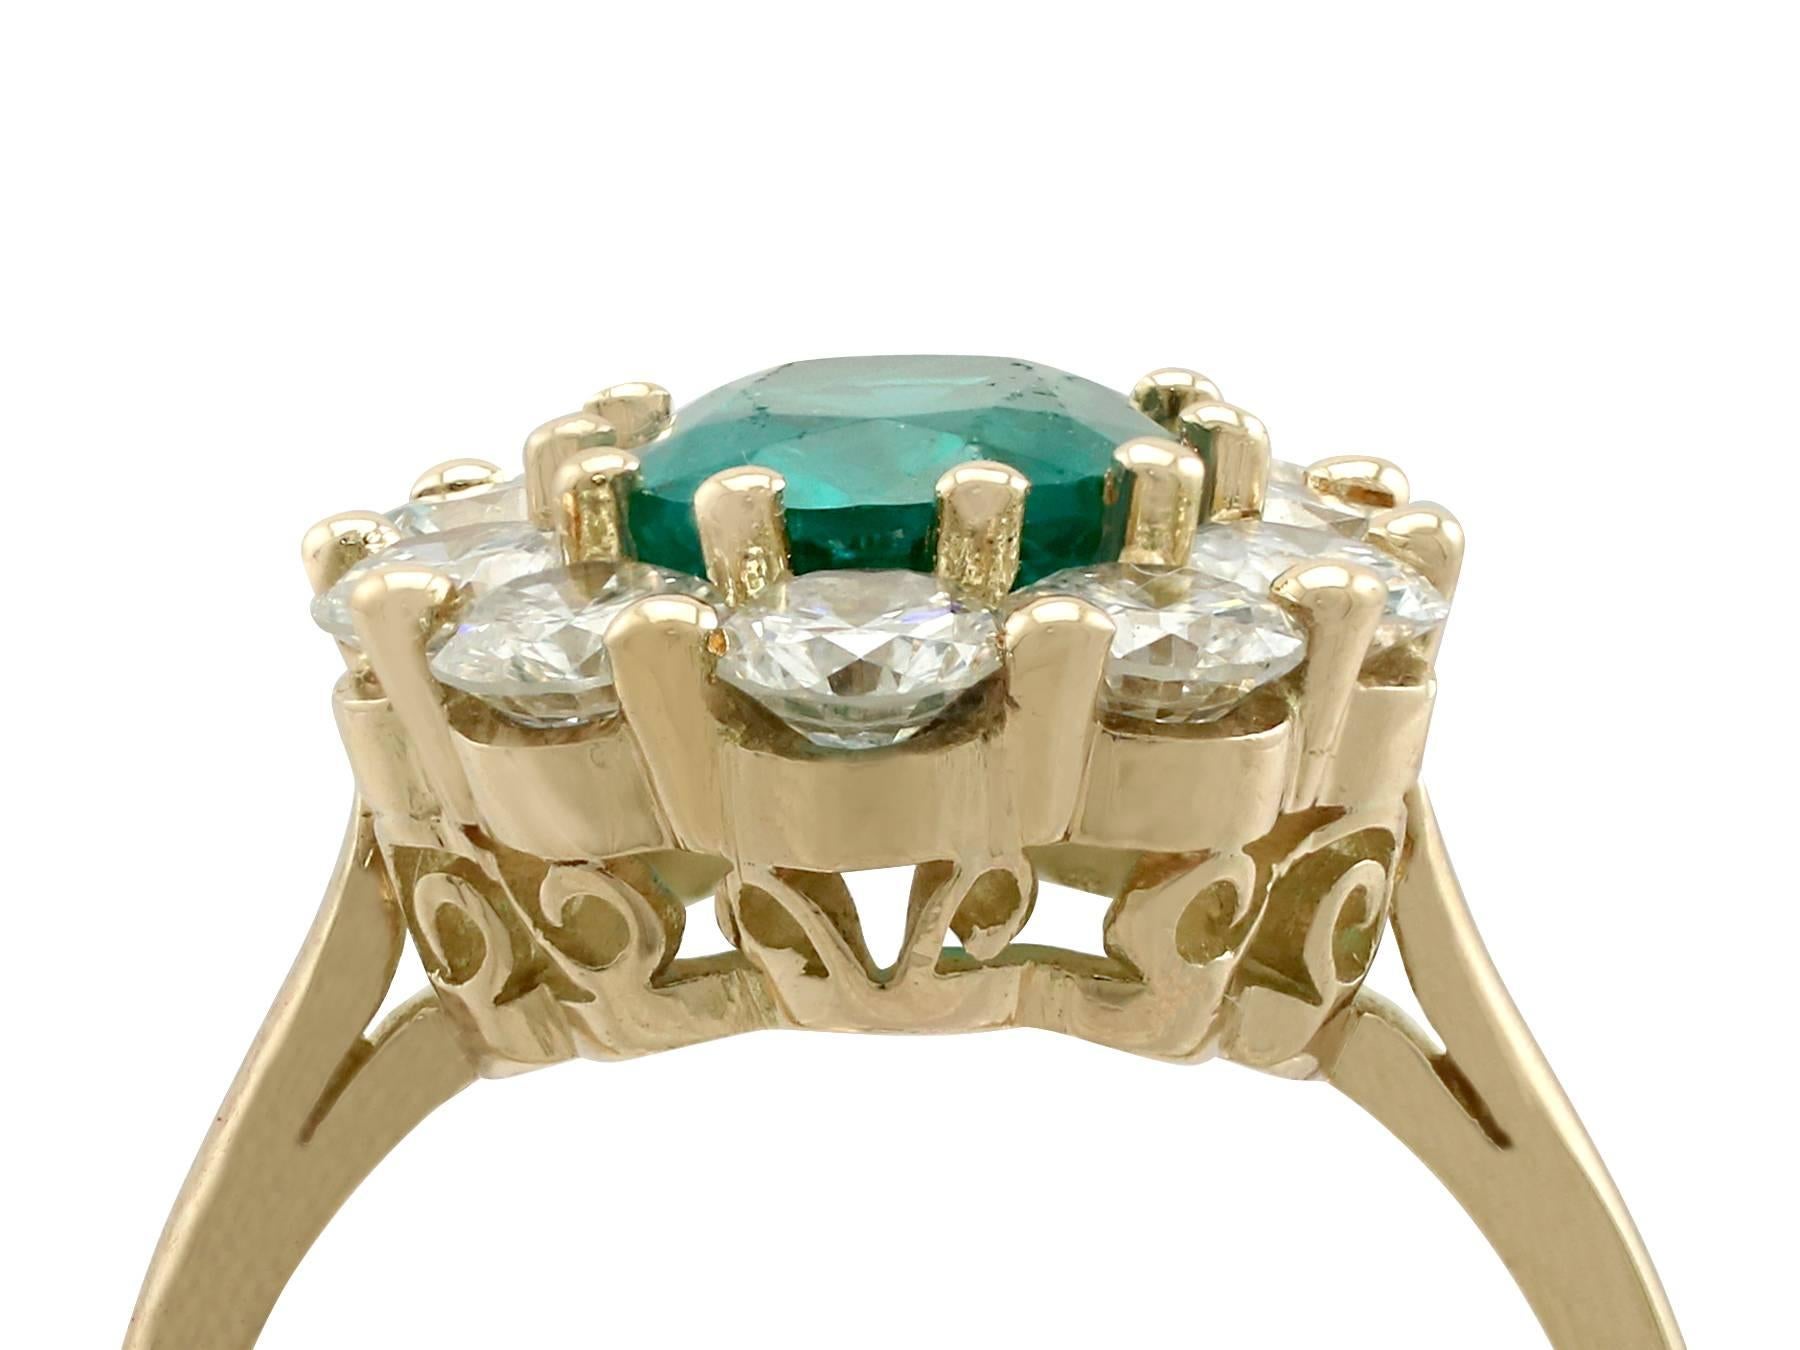 A stunning 2.05 carat emerald and 1.45 carat diamond, 18 carat yellow gold dress ring; part of our diverse jewellery collections

This stunning, fine and impressive emerald and diamond cluster ring has been crafted in 18 ct yellow gold.

The pierced